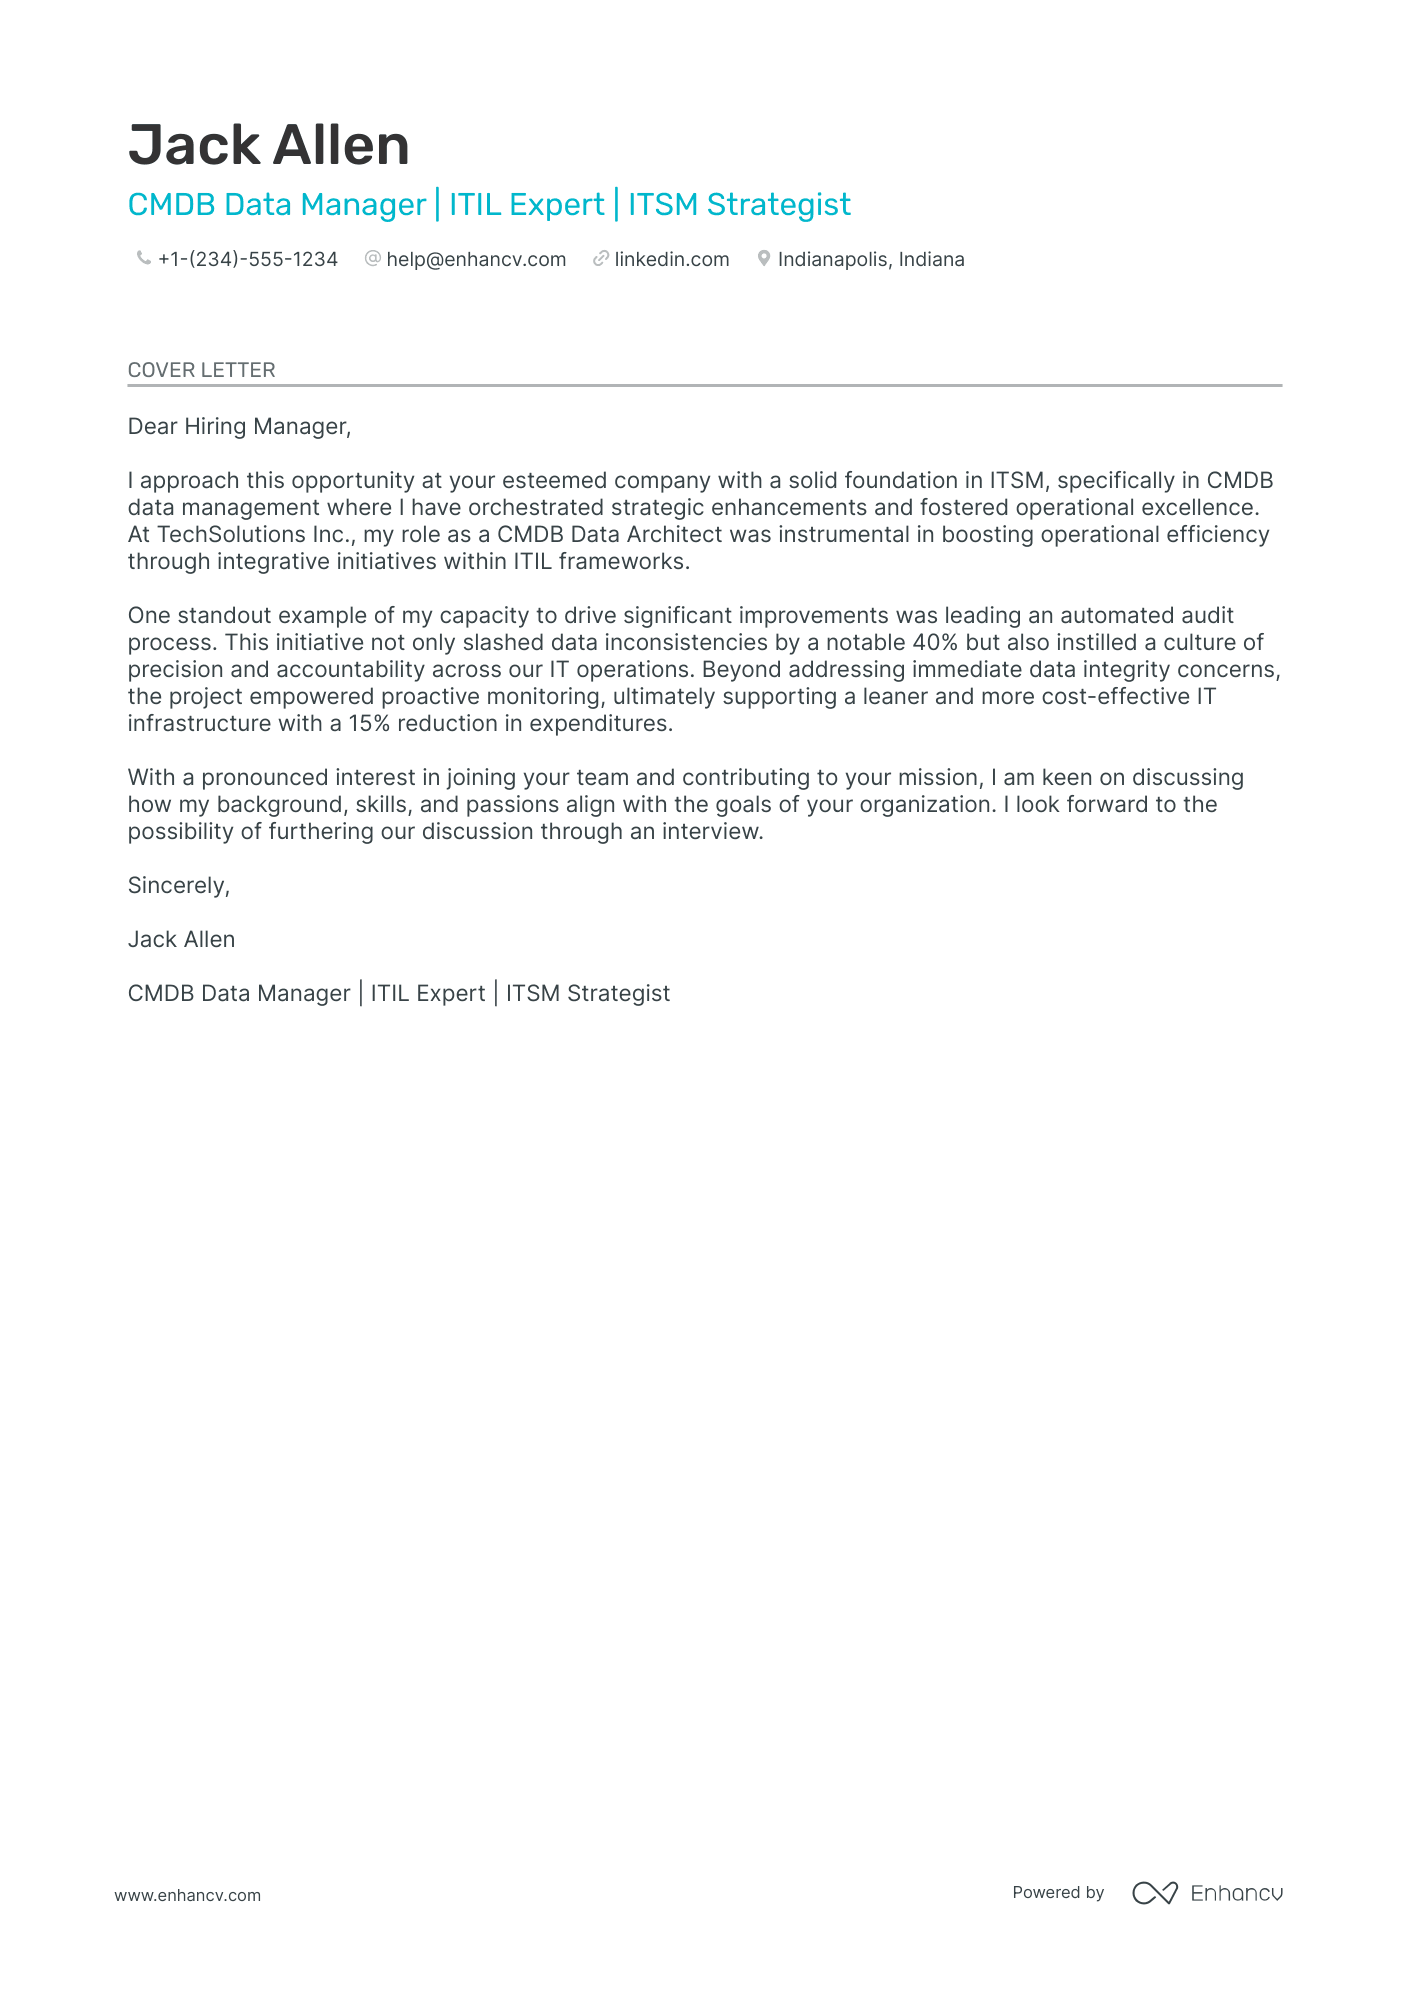 sample of business analyst cover letter